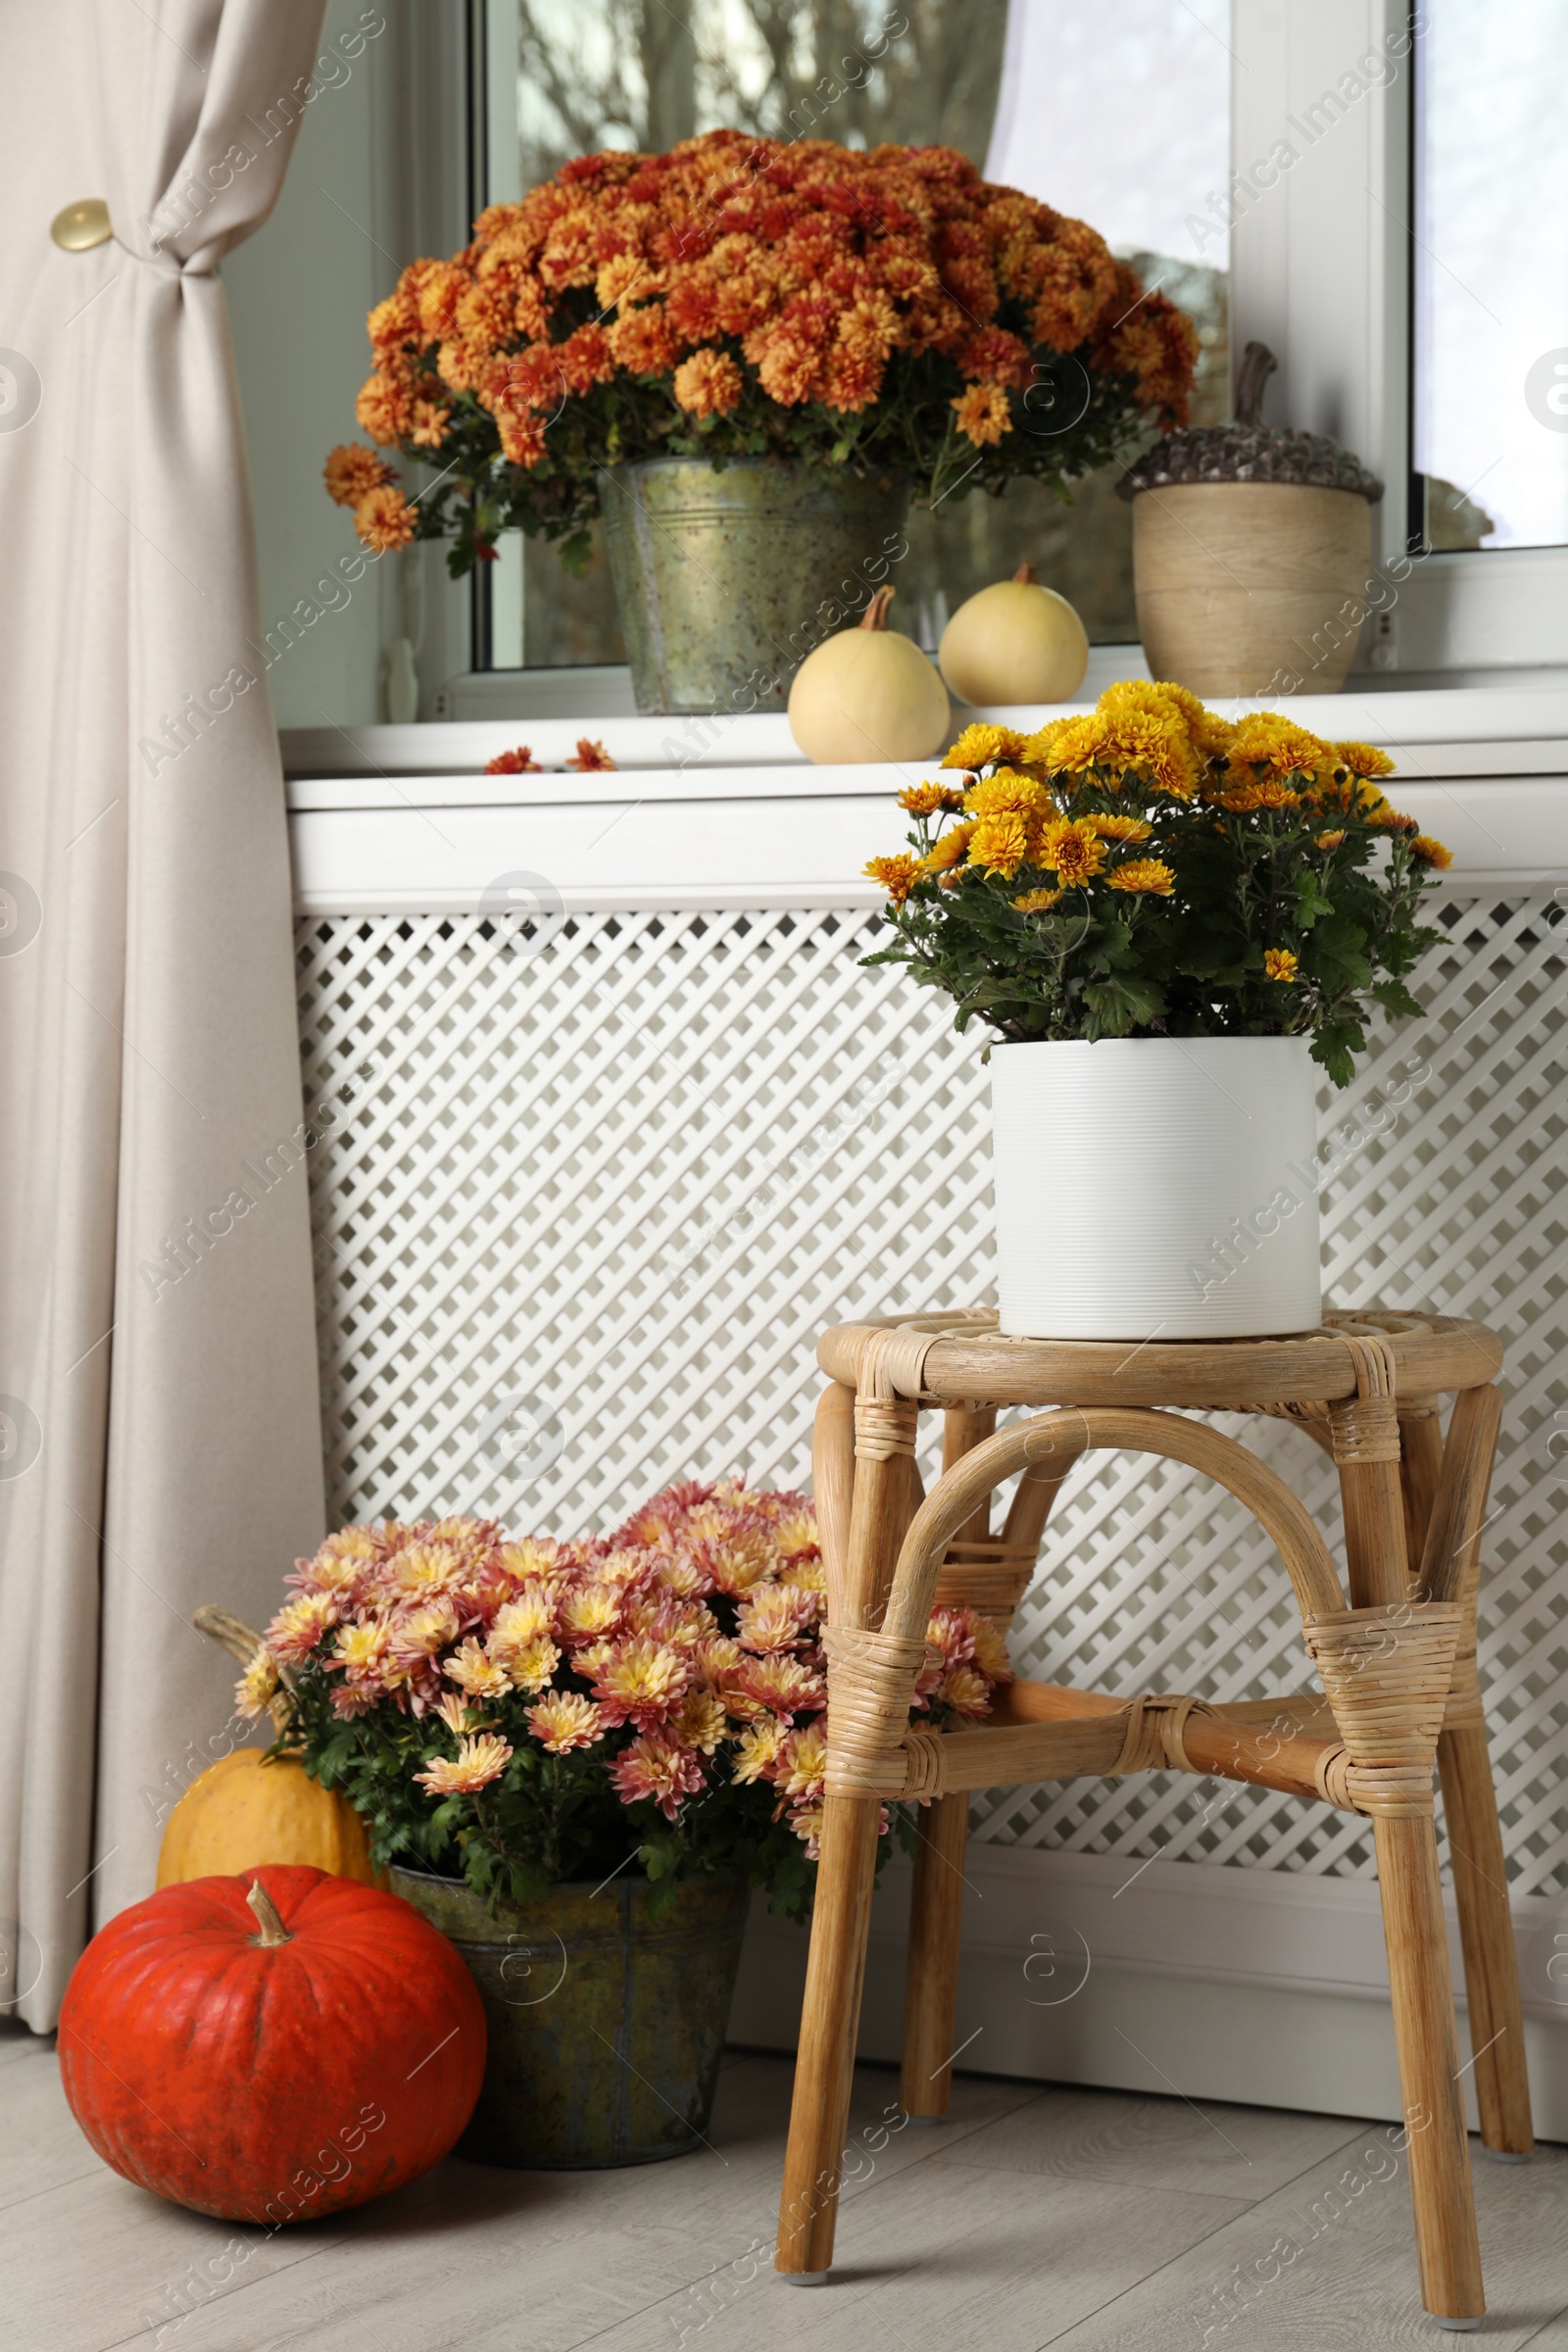 Photo of Beautiful potted chrysanthemum flowers and decor in room